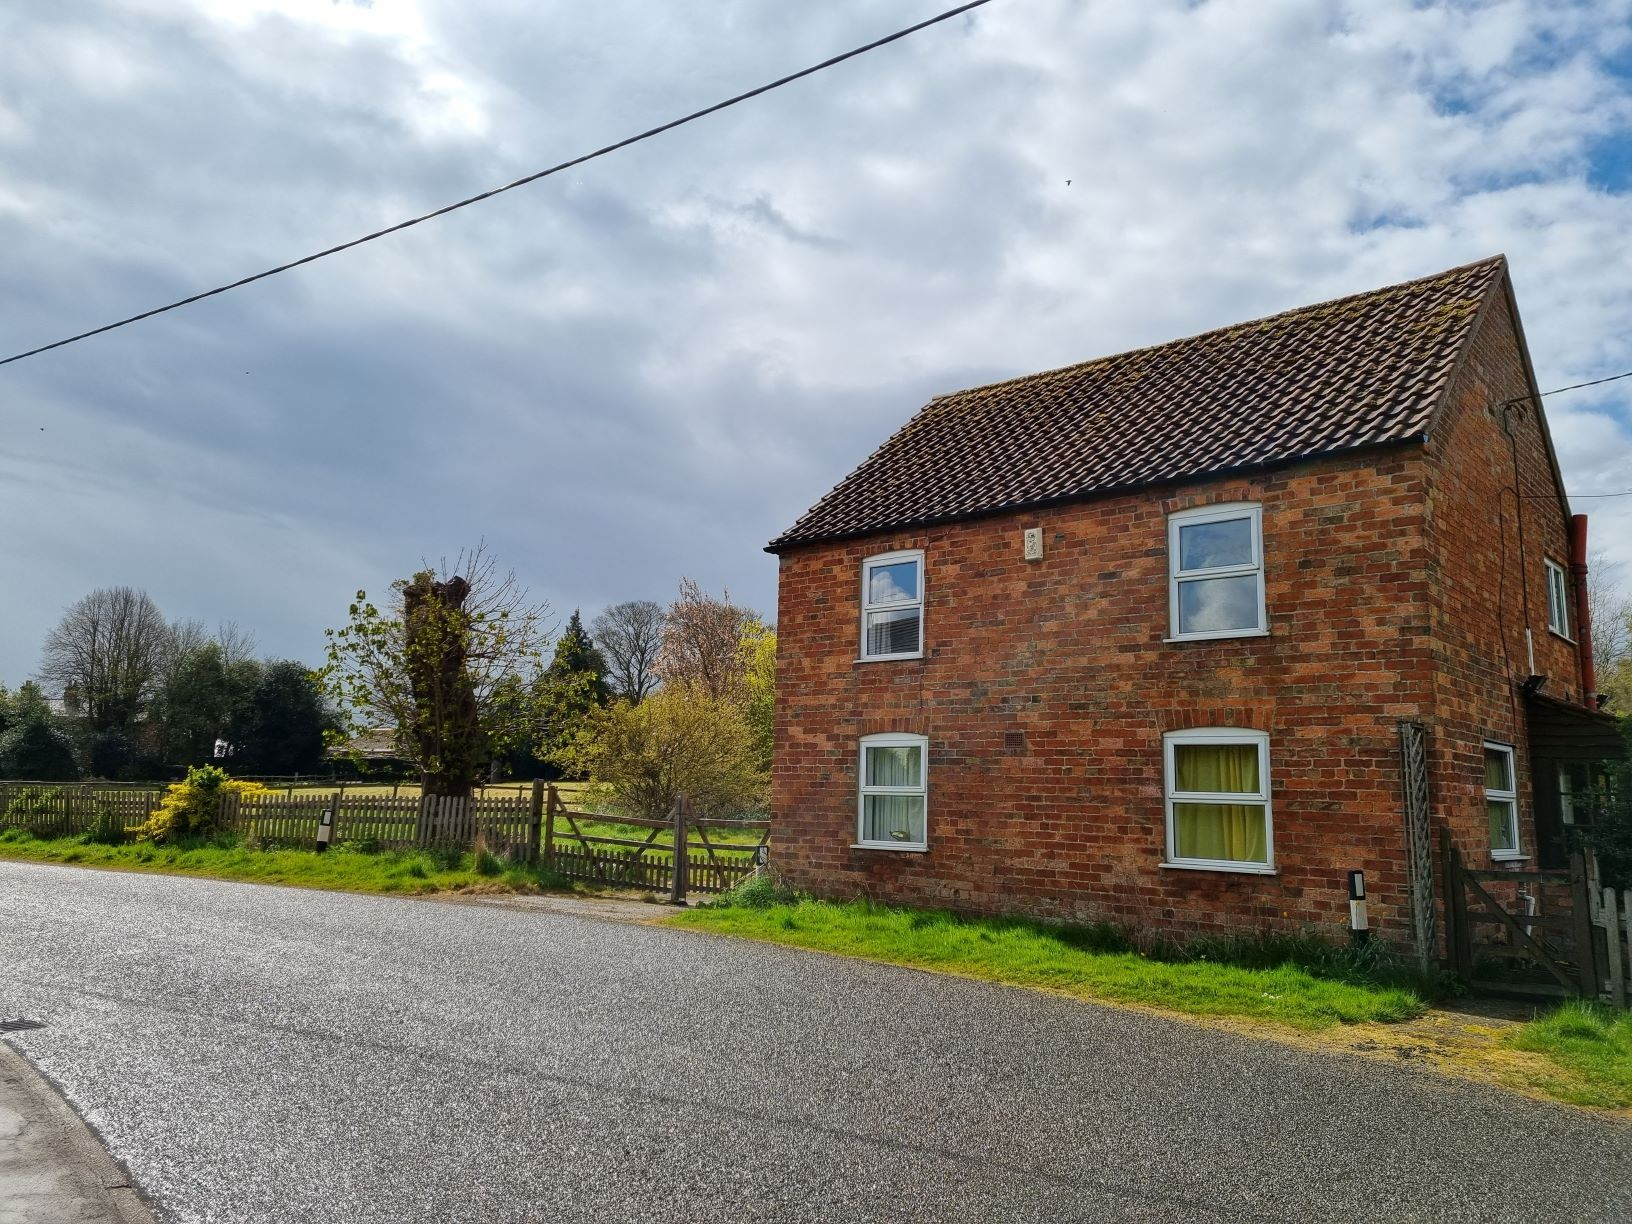 Default iProperty listing for Pinfold Cottage - a 3 bed home for sale in Raithby, Lincs (external content)mage